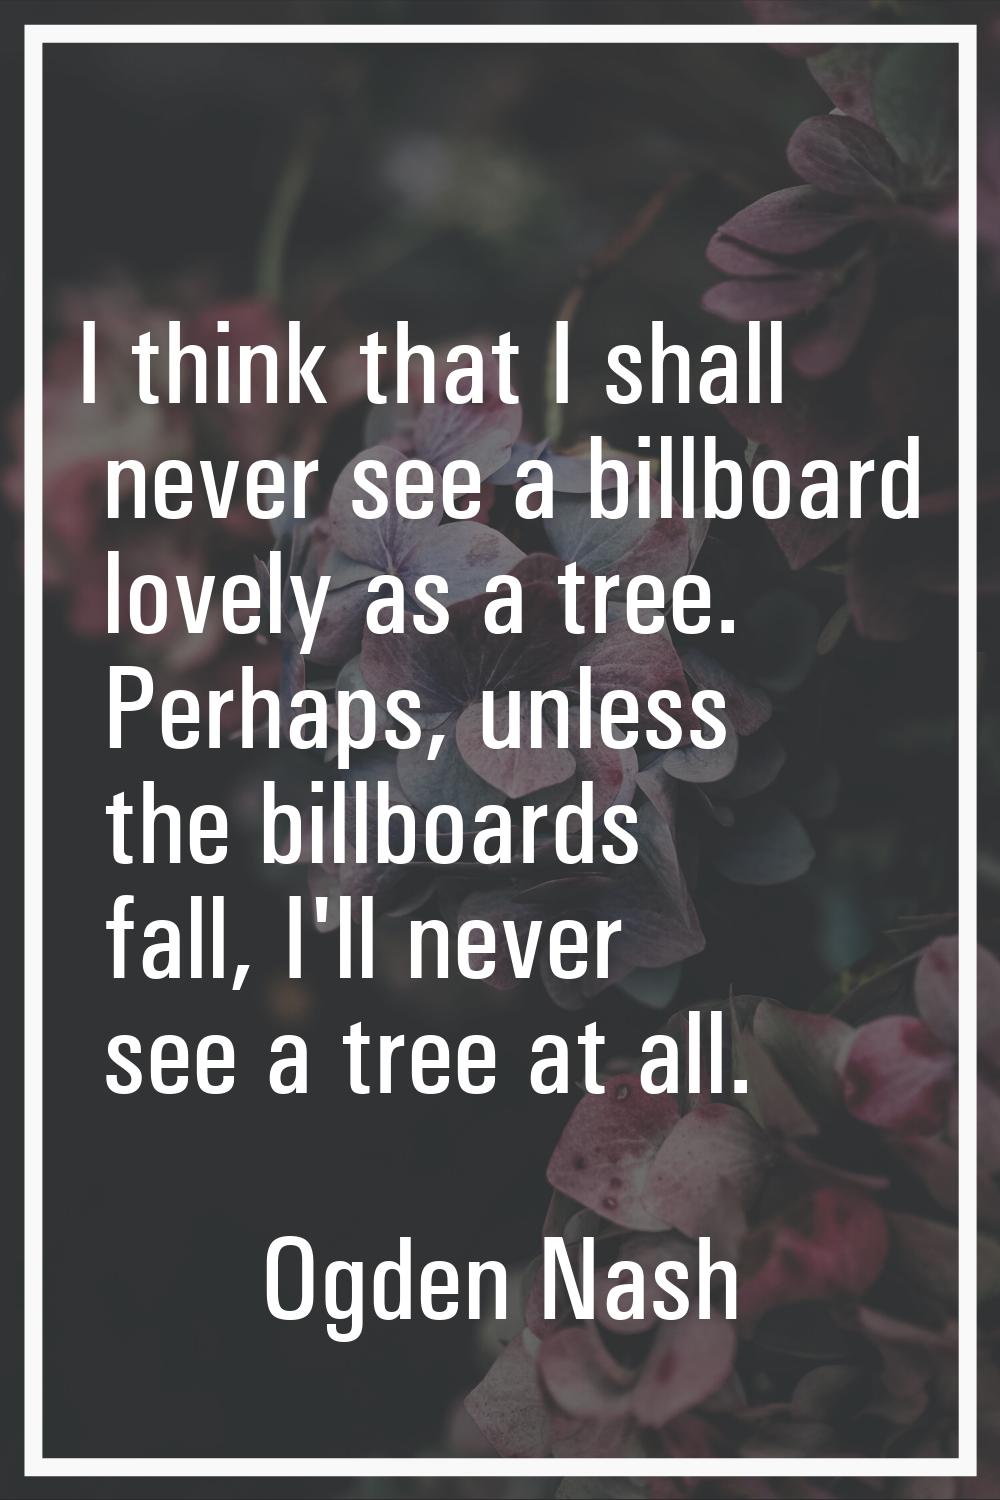 I think that I shall never see a billboard lovely as a tree. Perhaps, unless the billboards fall, I